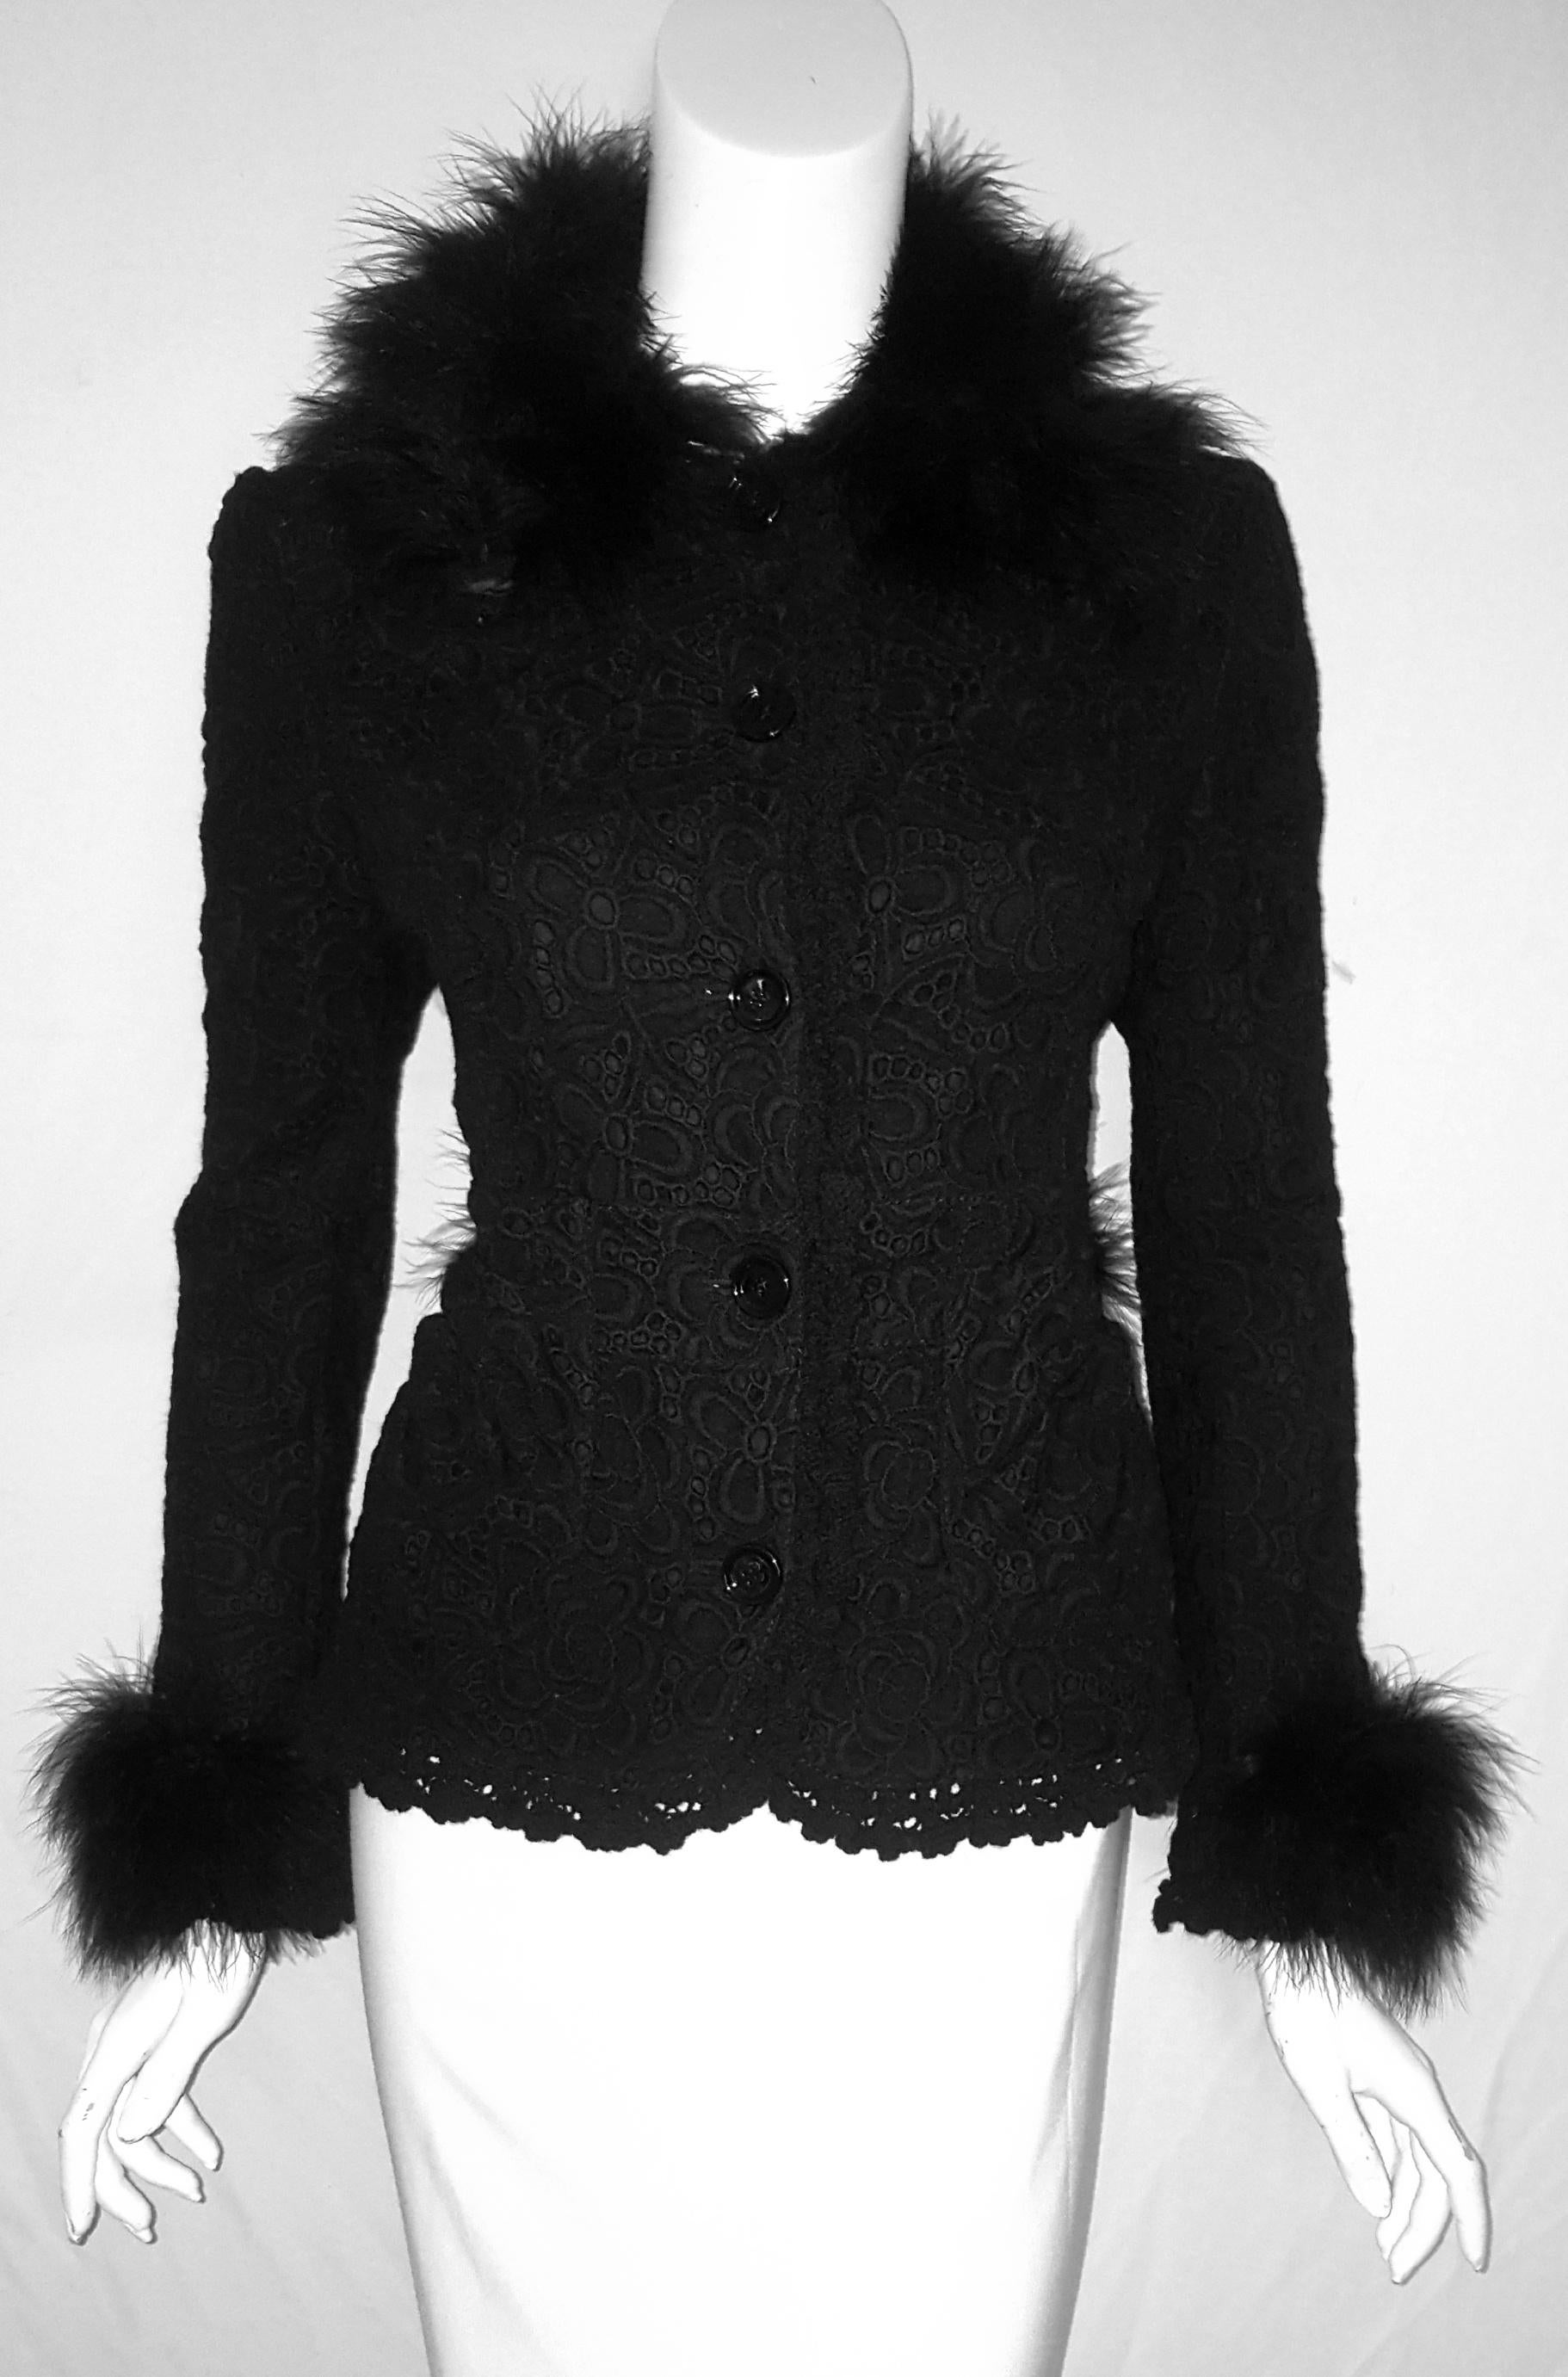 Dolce & Gabbana wool crochet jacket enhanced with turkey feathers on the collar, the cuffs and back belt.  The turkey feathers are as soft as ostrich feathers.  The hem of the jacket is crocheted in scalloped design starting at the collar coming